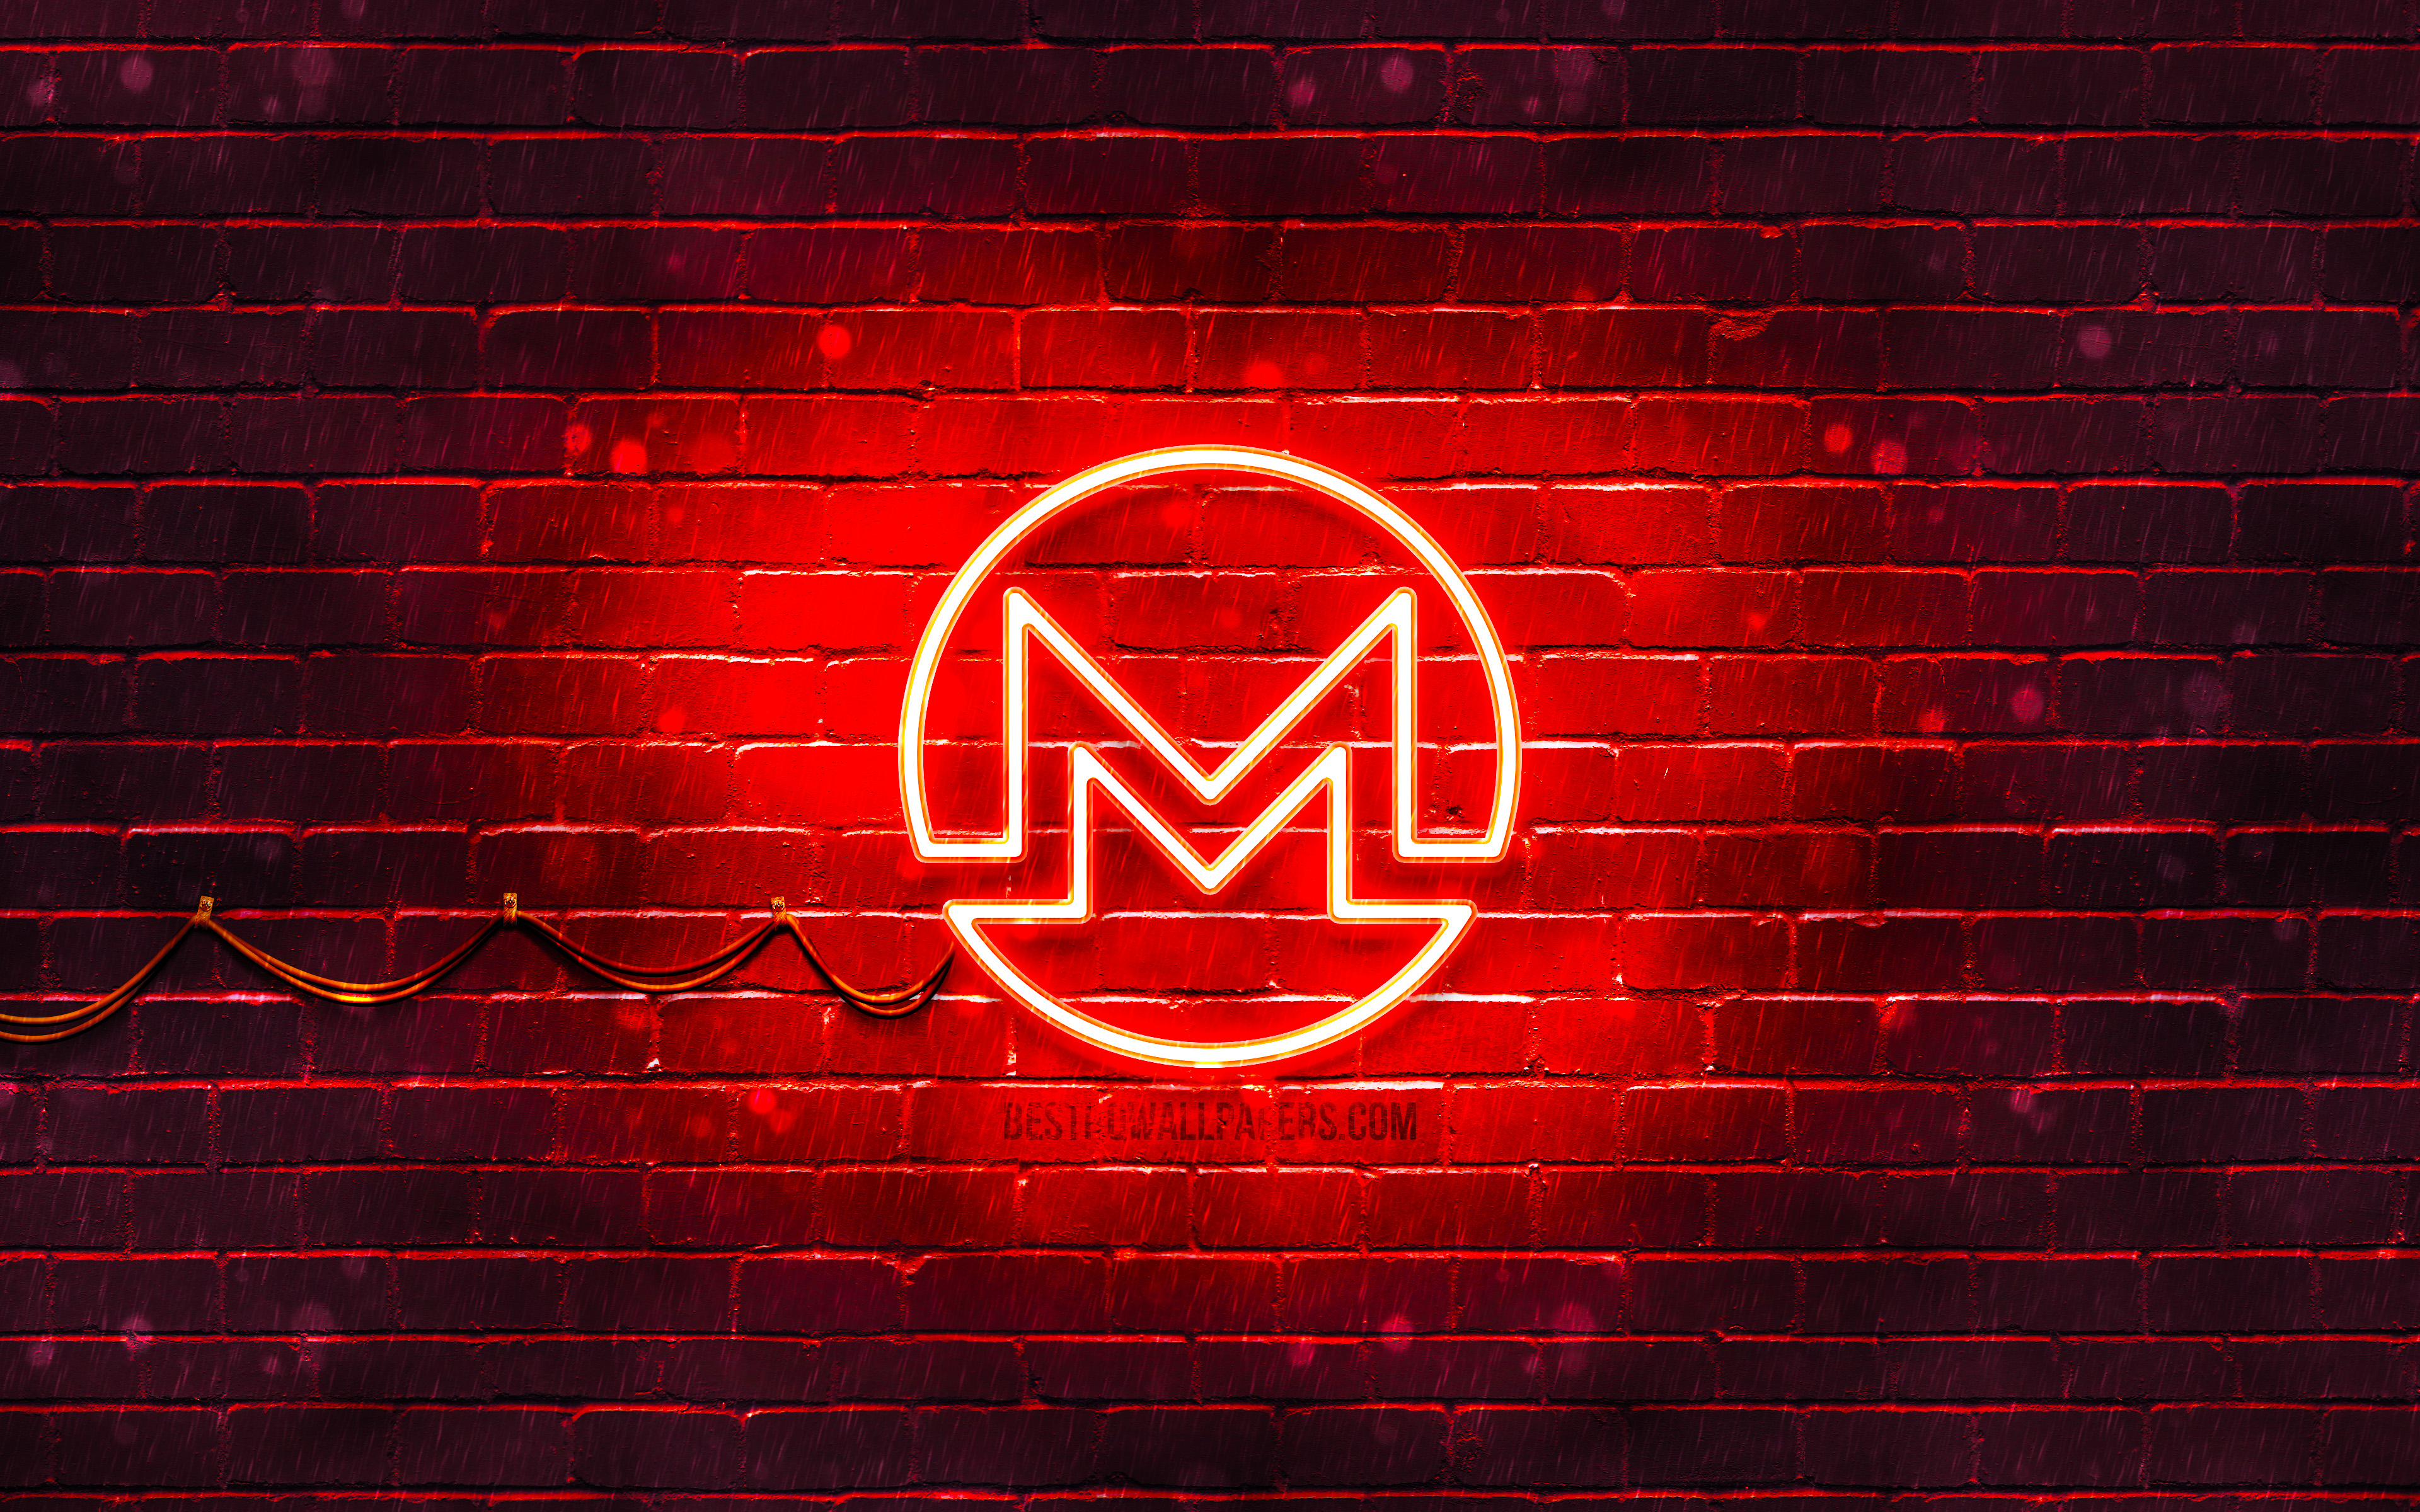 Download wallpaper Monero red logo, 4k, red brickwall, Monero logo, cryptocurrency, Peercoin neon logo, cryptocurrency signs, Monero for desktop with resolution 3840x2400. High Quality HD picture wallpaper